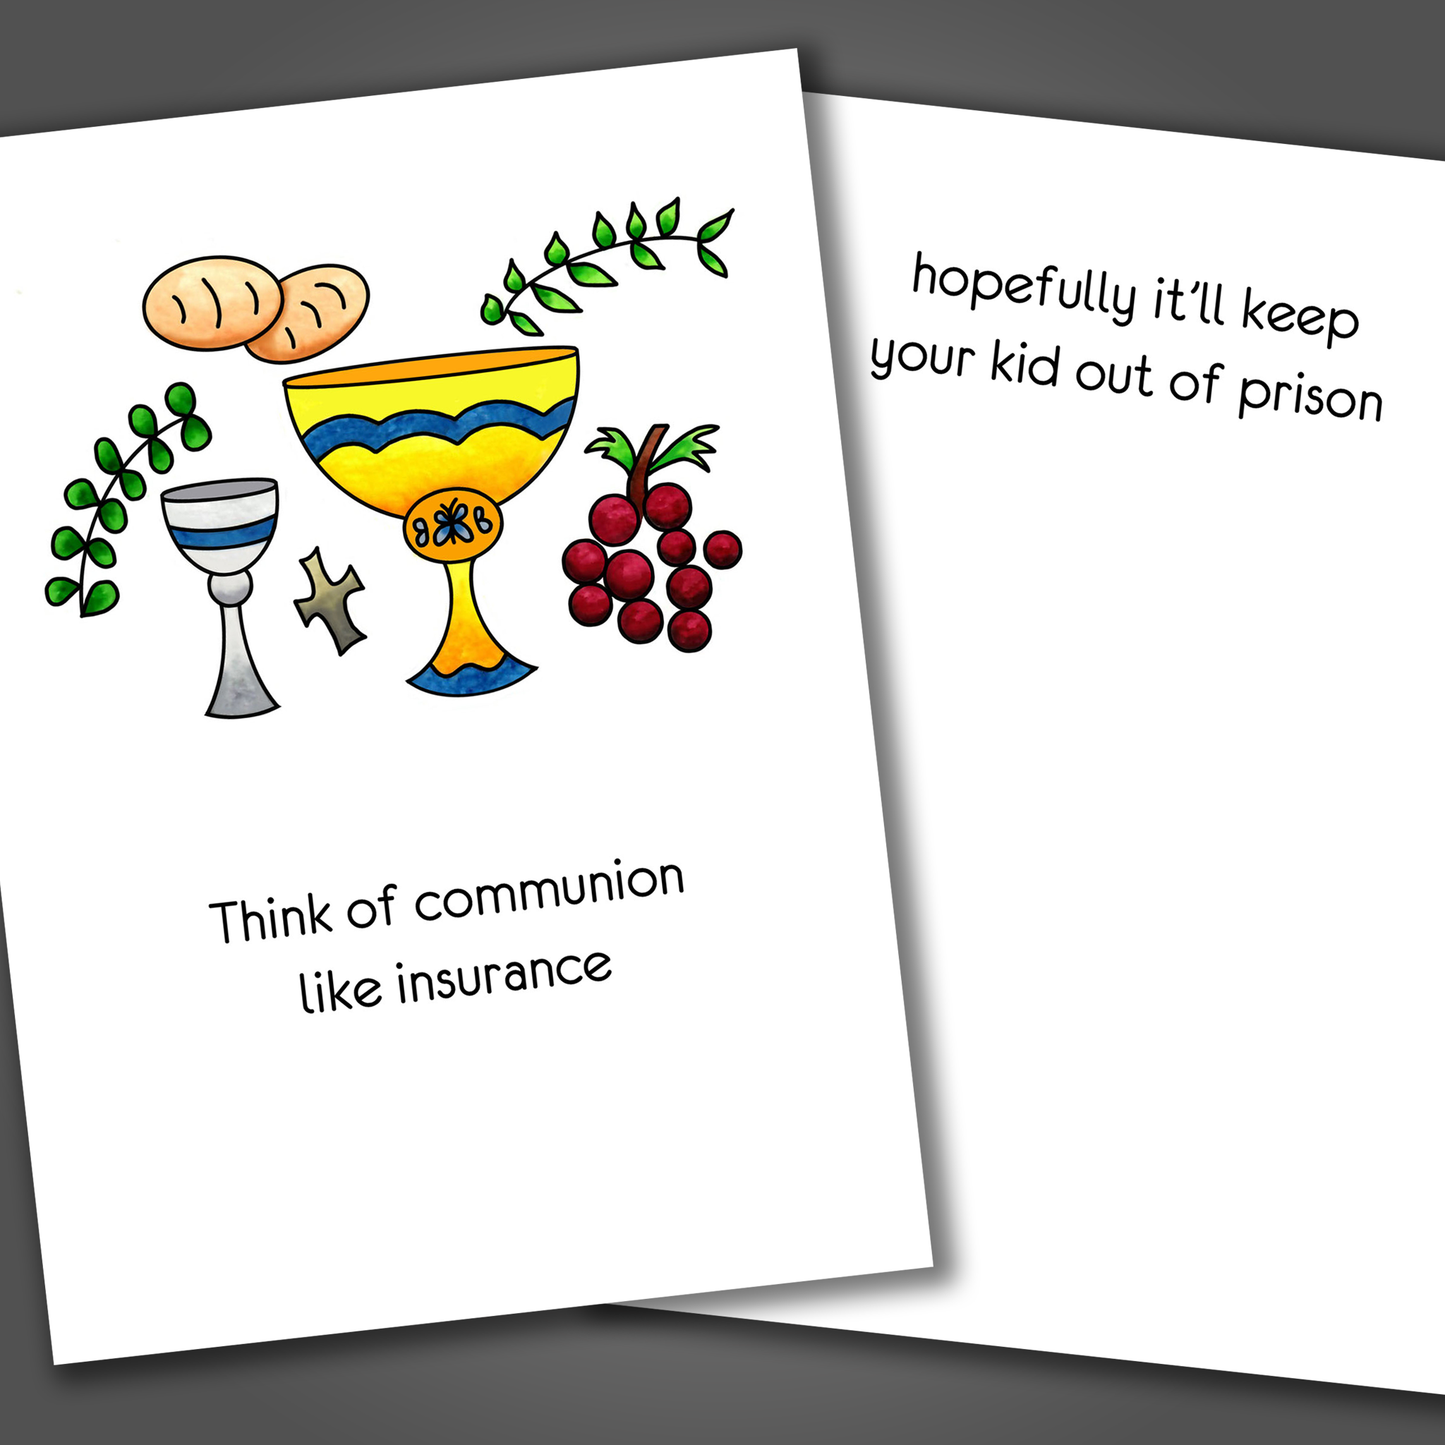 Funny communion card with religious objects drawn on the front of the card. Inside the card is a joke that says hopefully it will keep your kid out of prison.